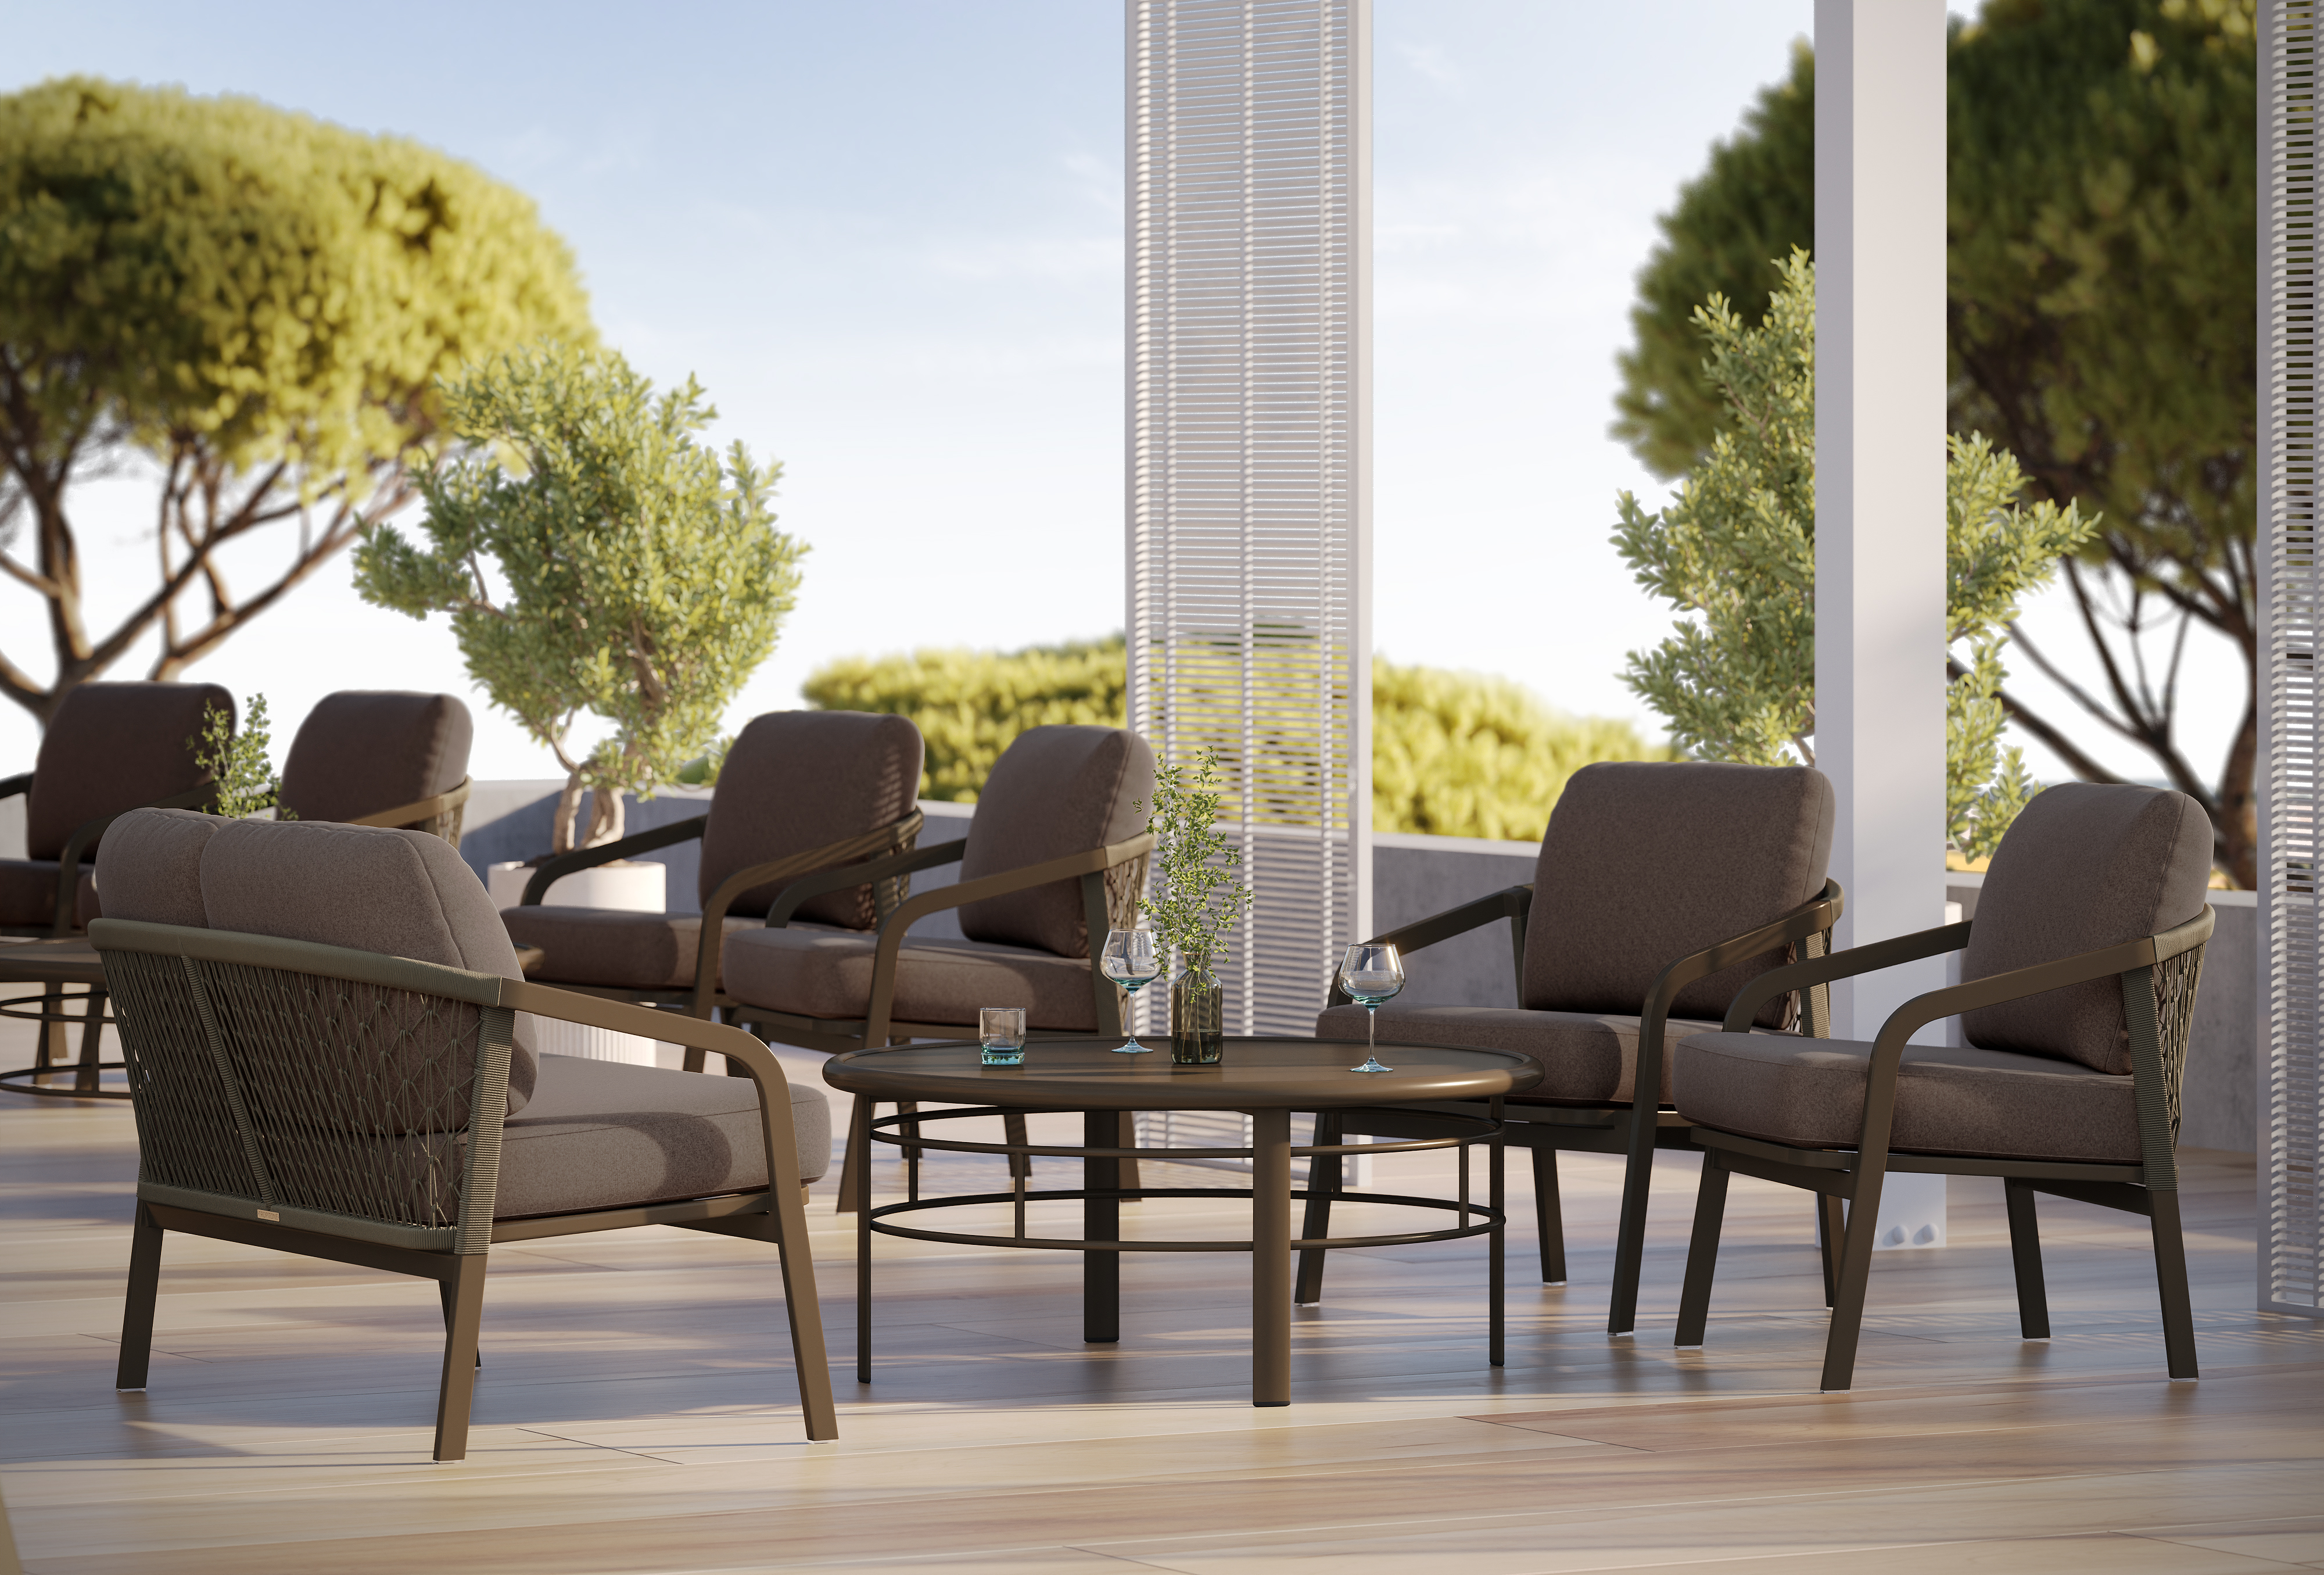 Outdoor Lounge Chairs and Tables for Hospitality 